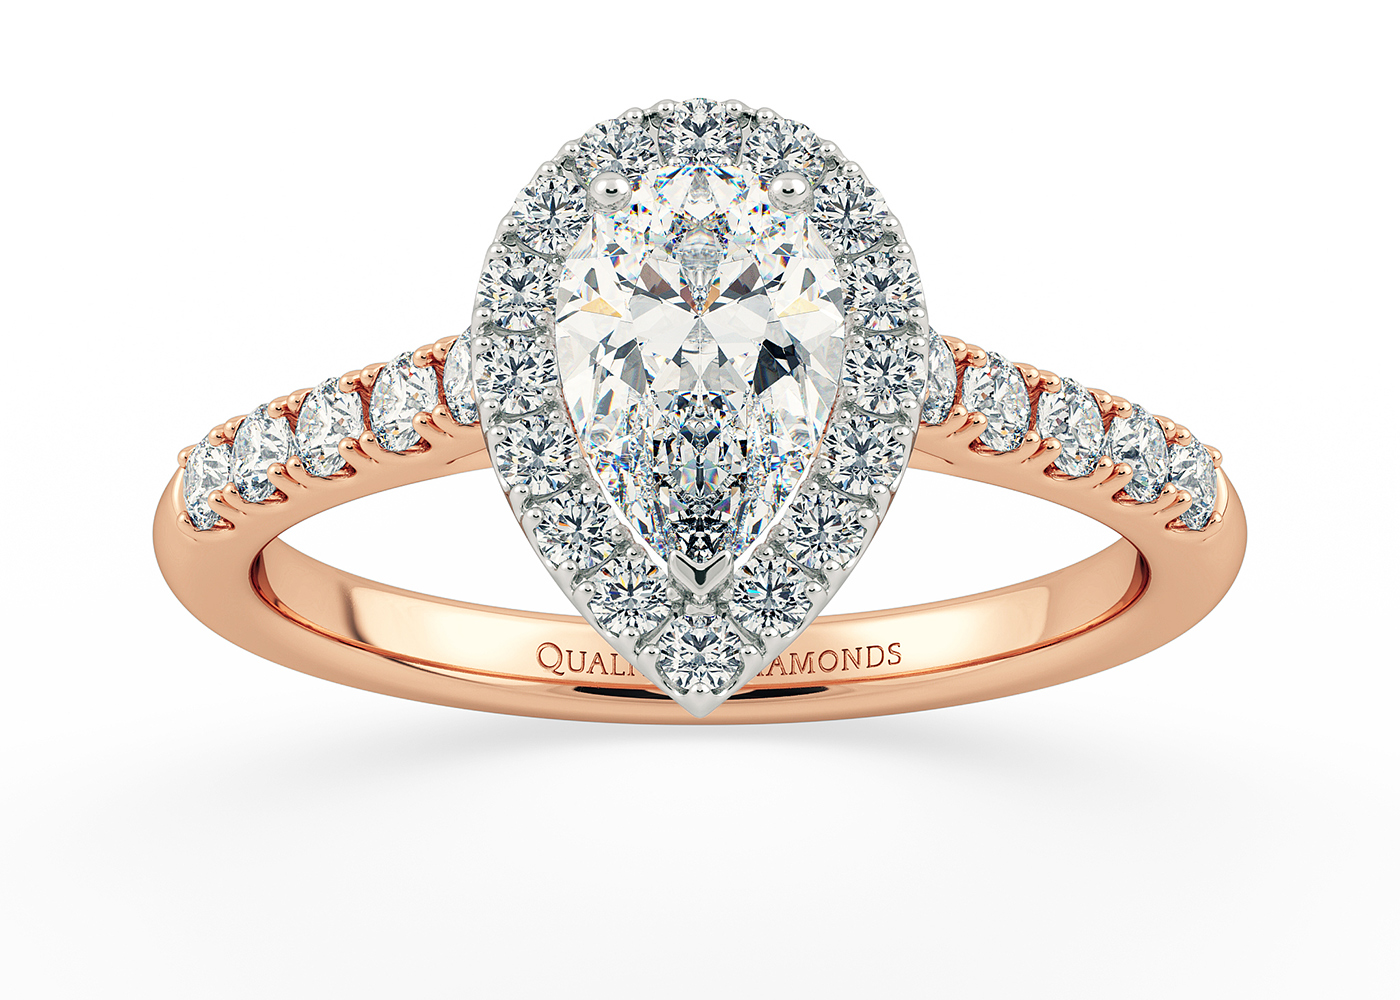 Two Carat Halo Pear Diamond Ring in 18K Rose Gold